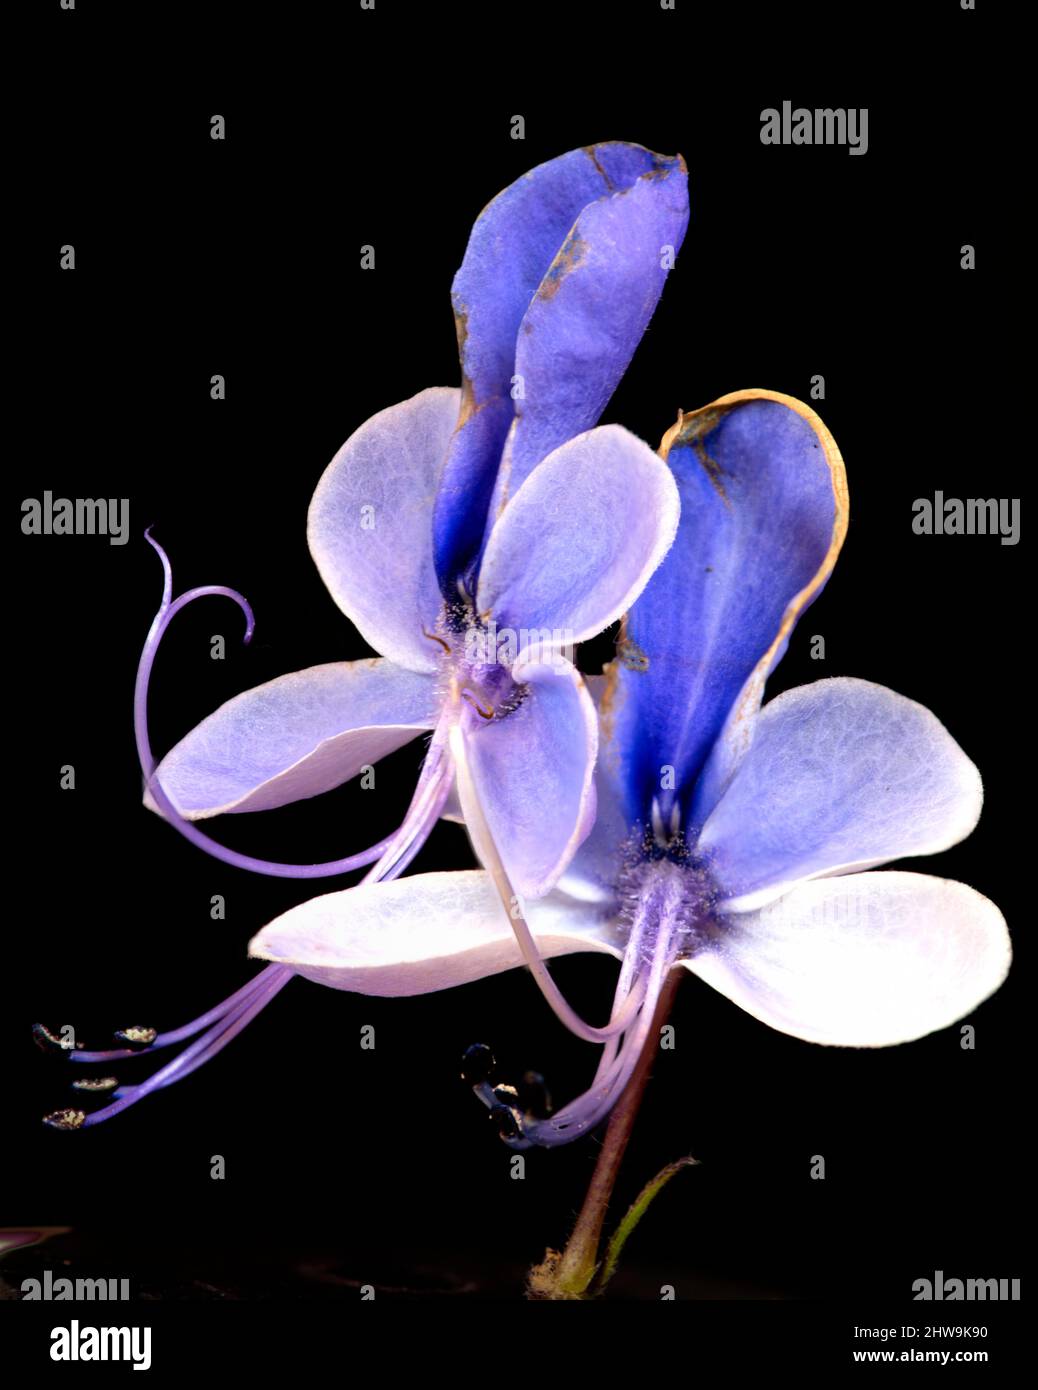 closeup focus stacked image of blue butterfly plant (Clerodendrum ugandense) flower Stock Photo